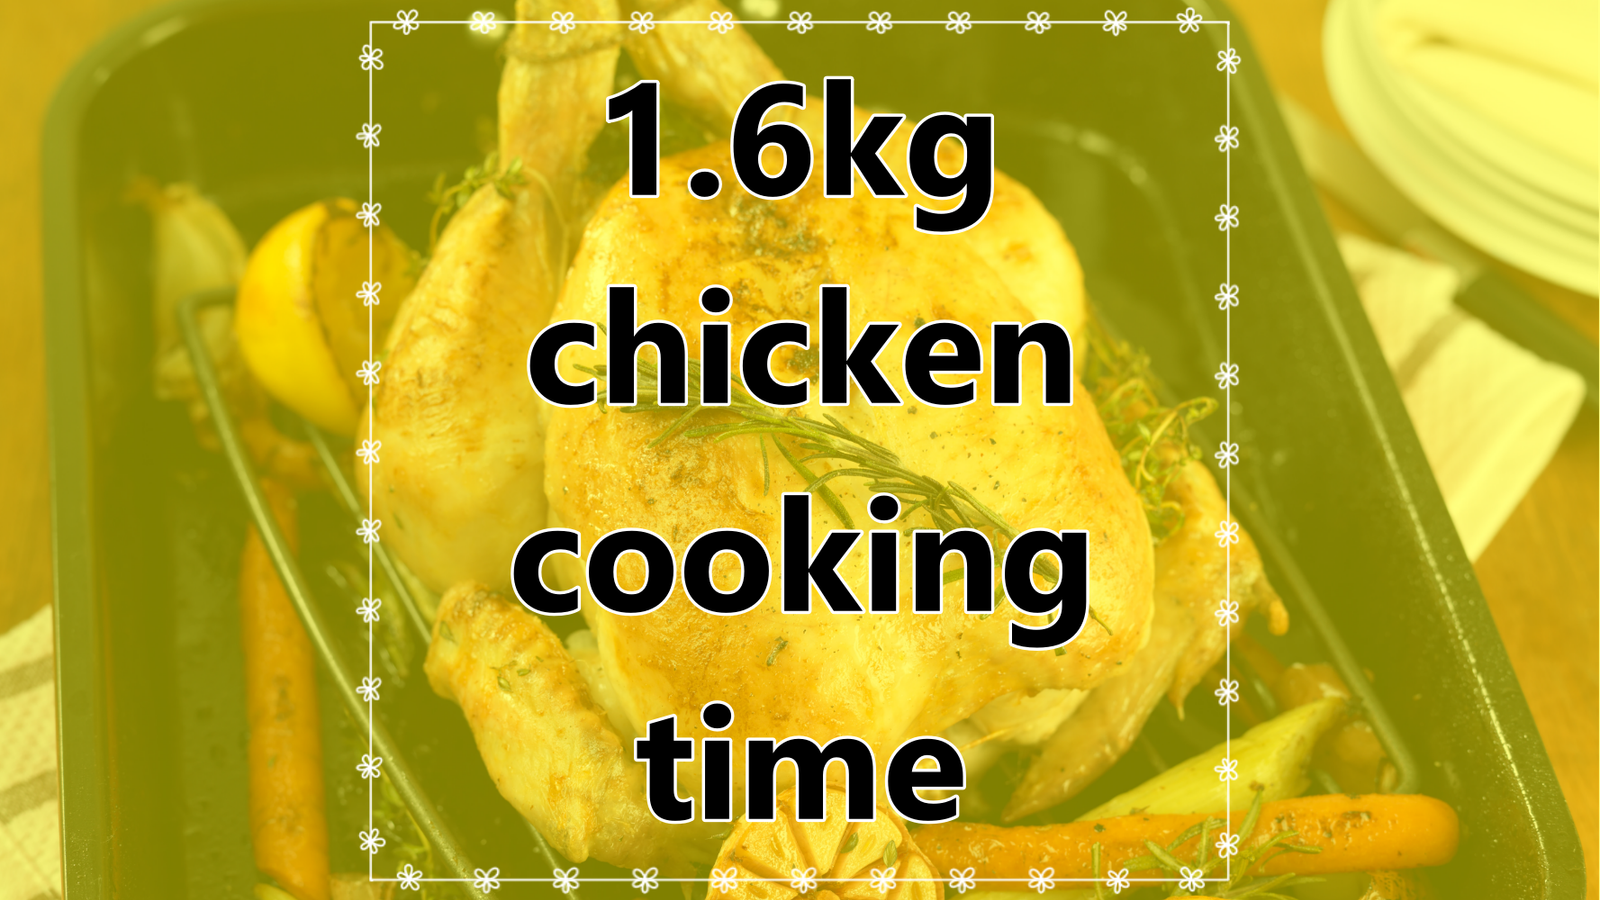 1.6kg chicken cooking time